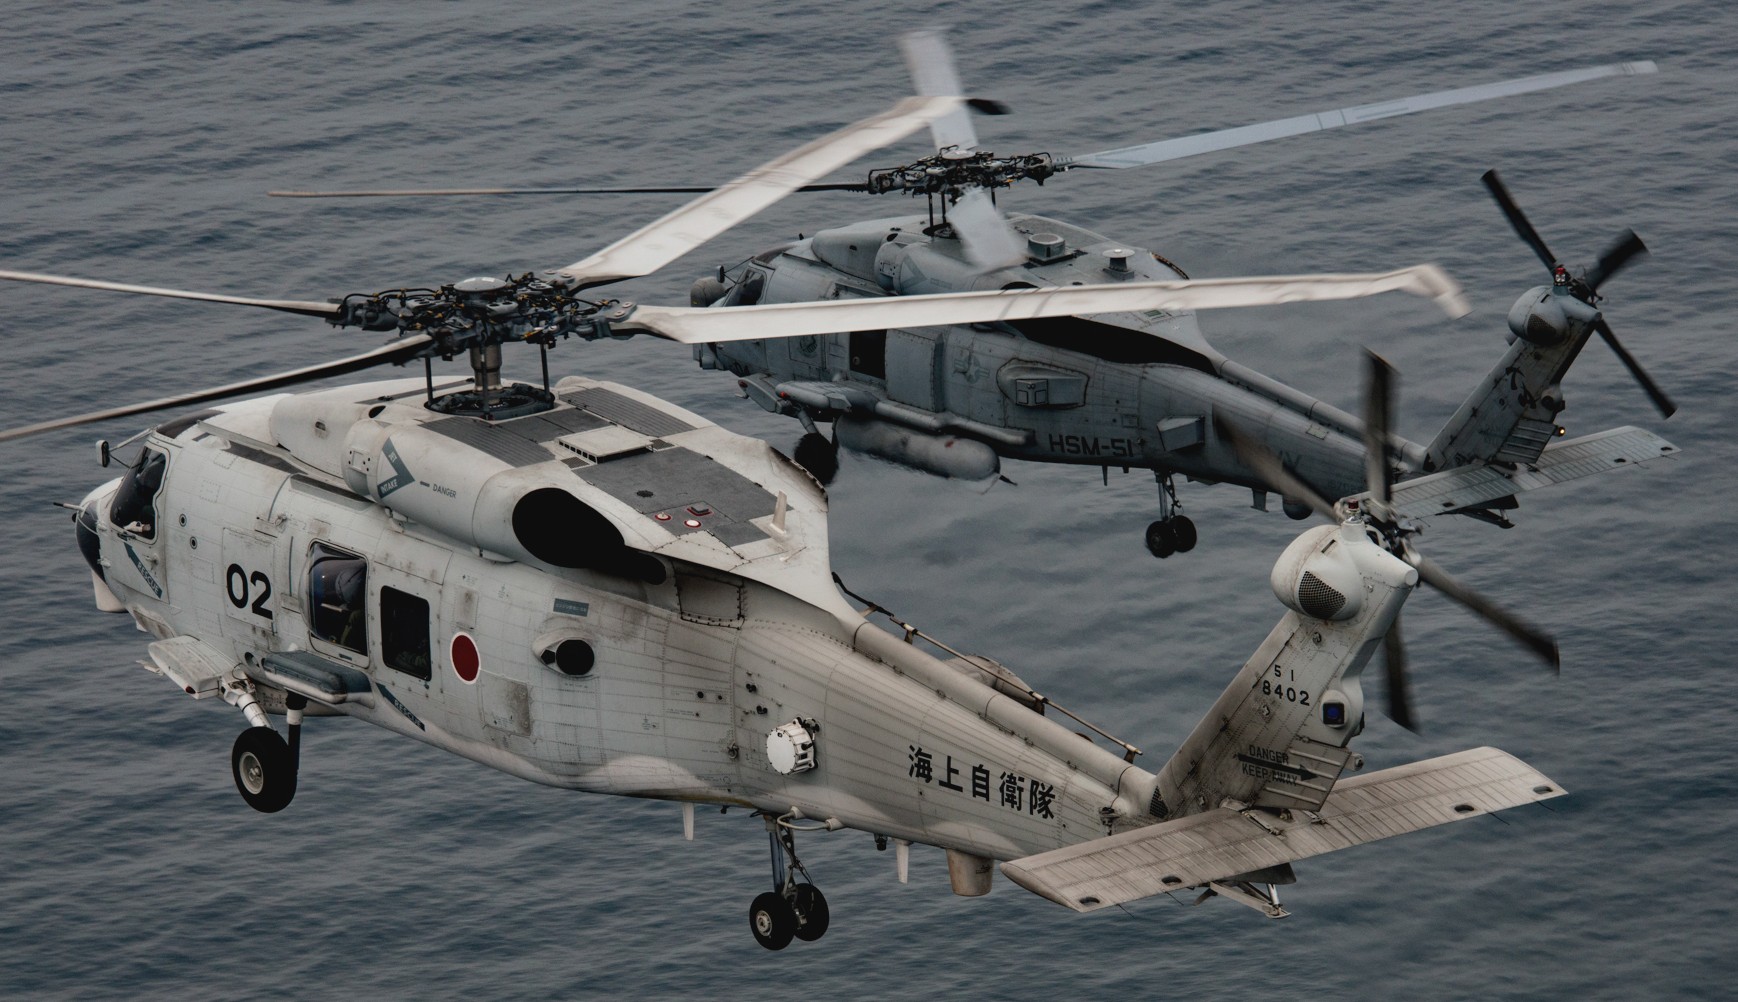 hsm-51 warlords helicopter maritime strike squadron mh-60r seahawk navy 2016 05